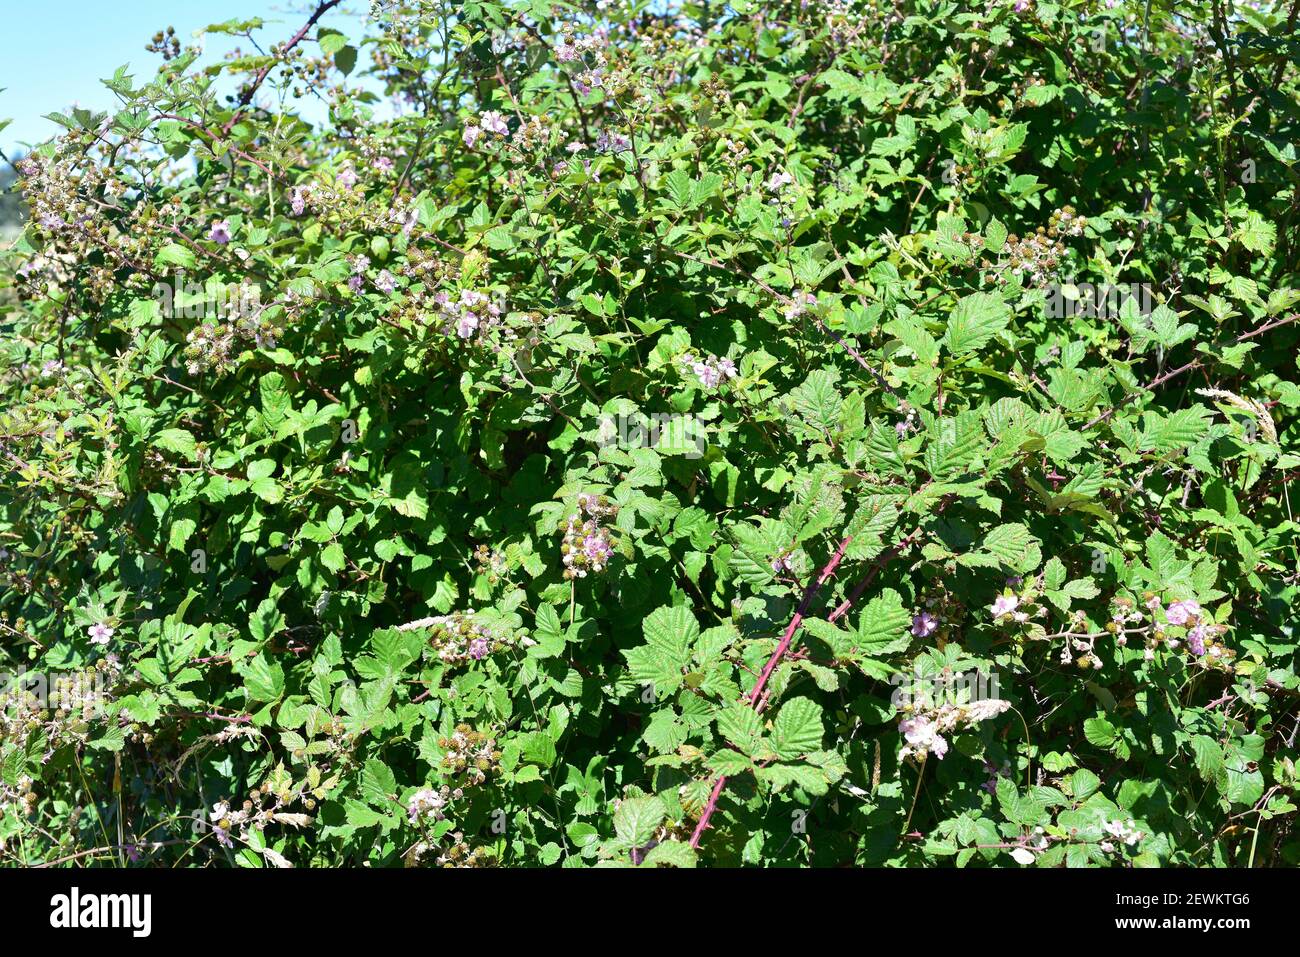 Elmleaf blackberry (Rubus ulmifolius) is a thorny shrub native to Europe and north Africa and naturalized in North America, South America and Stock Photo